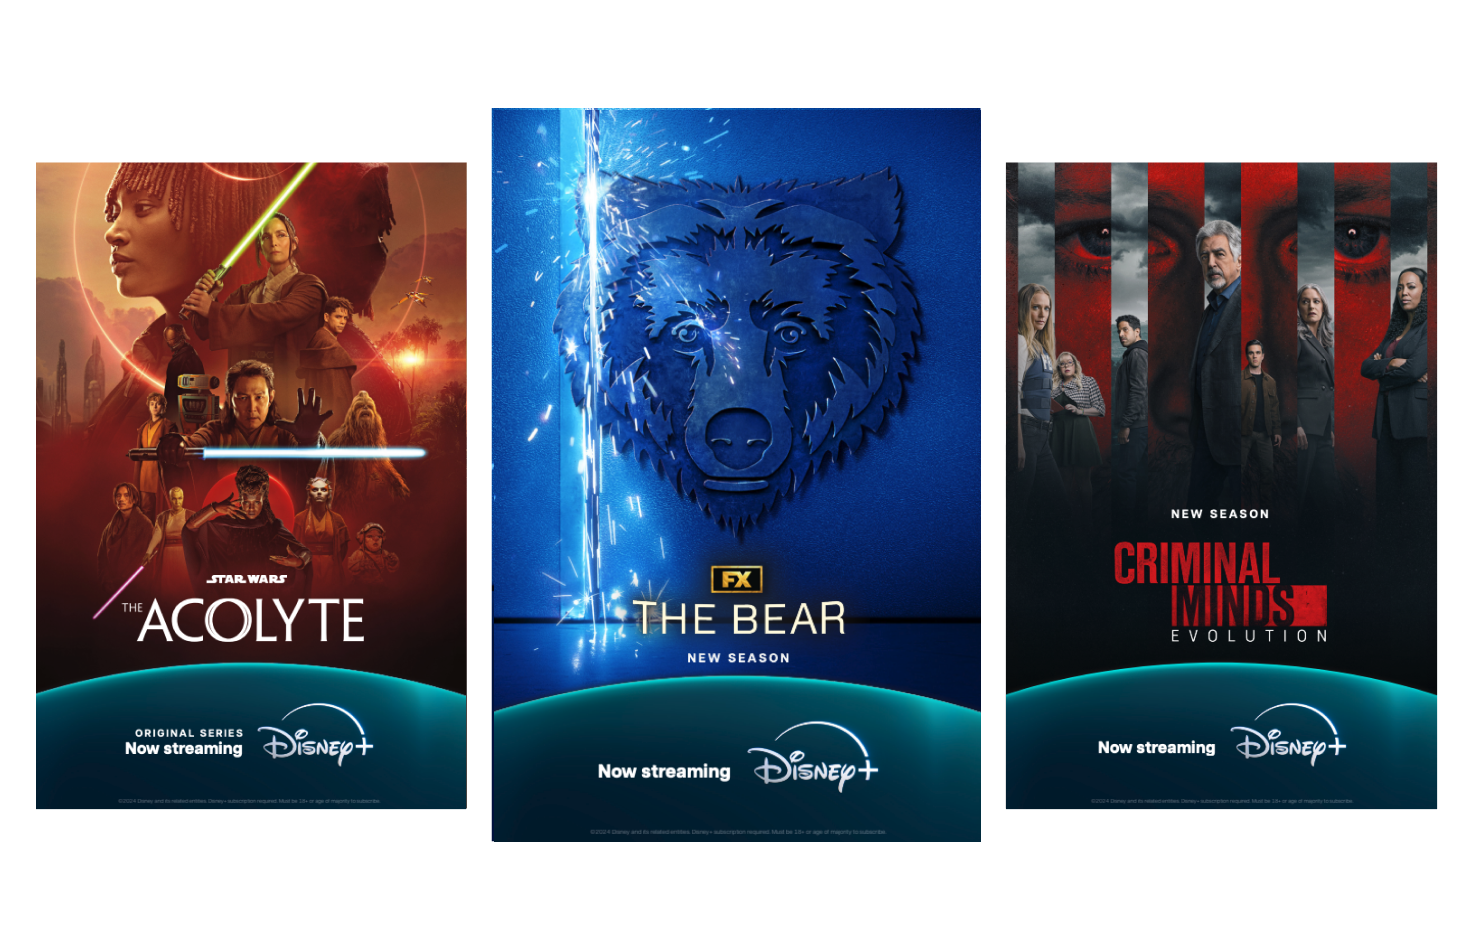 Posters for the Disney+ films and series Acolyte, The Bear and Criminal Minds.